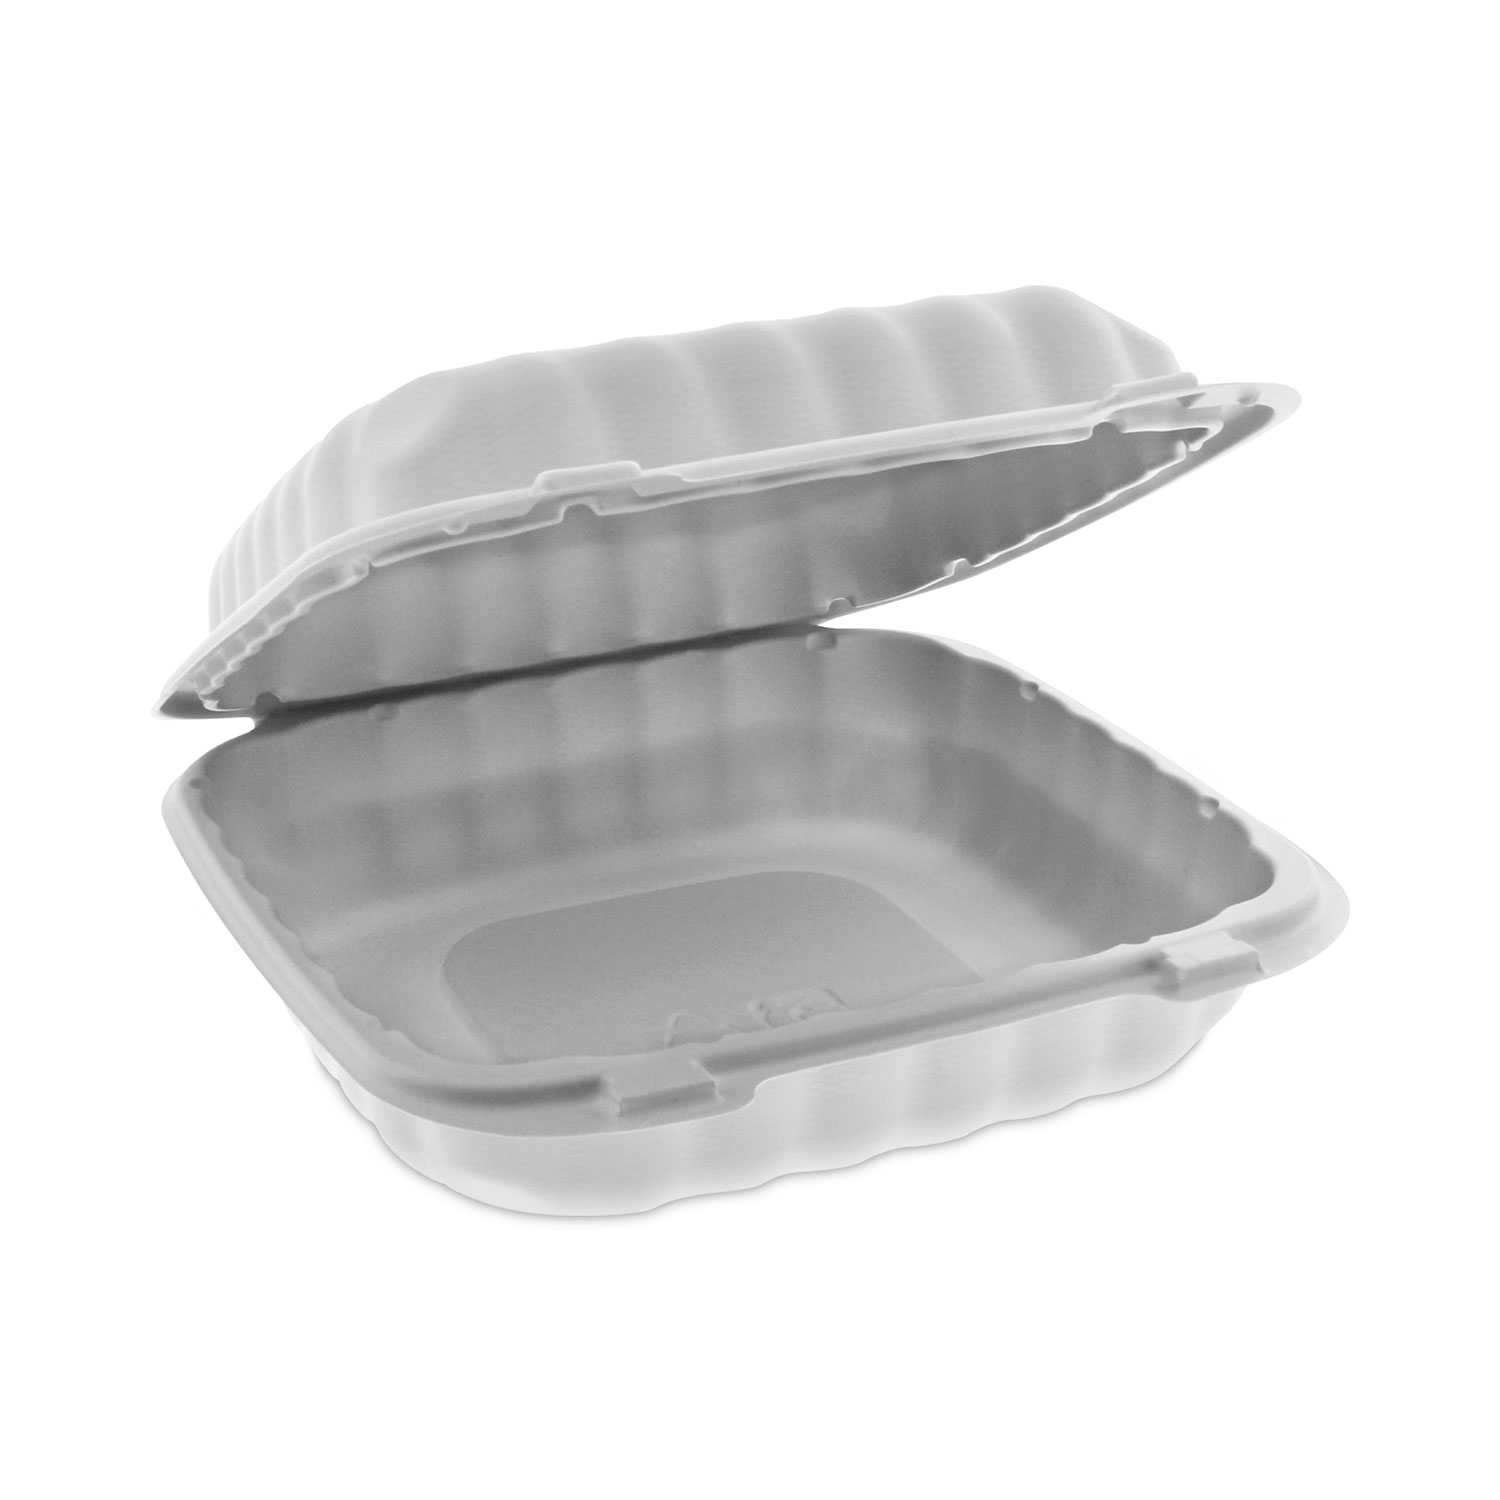 Vented Microwavable Hinged-Lid Takeout Container, 8.5 x 8.5 x 3.1, White, 146-carton